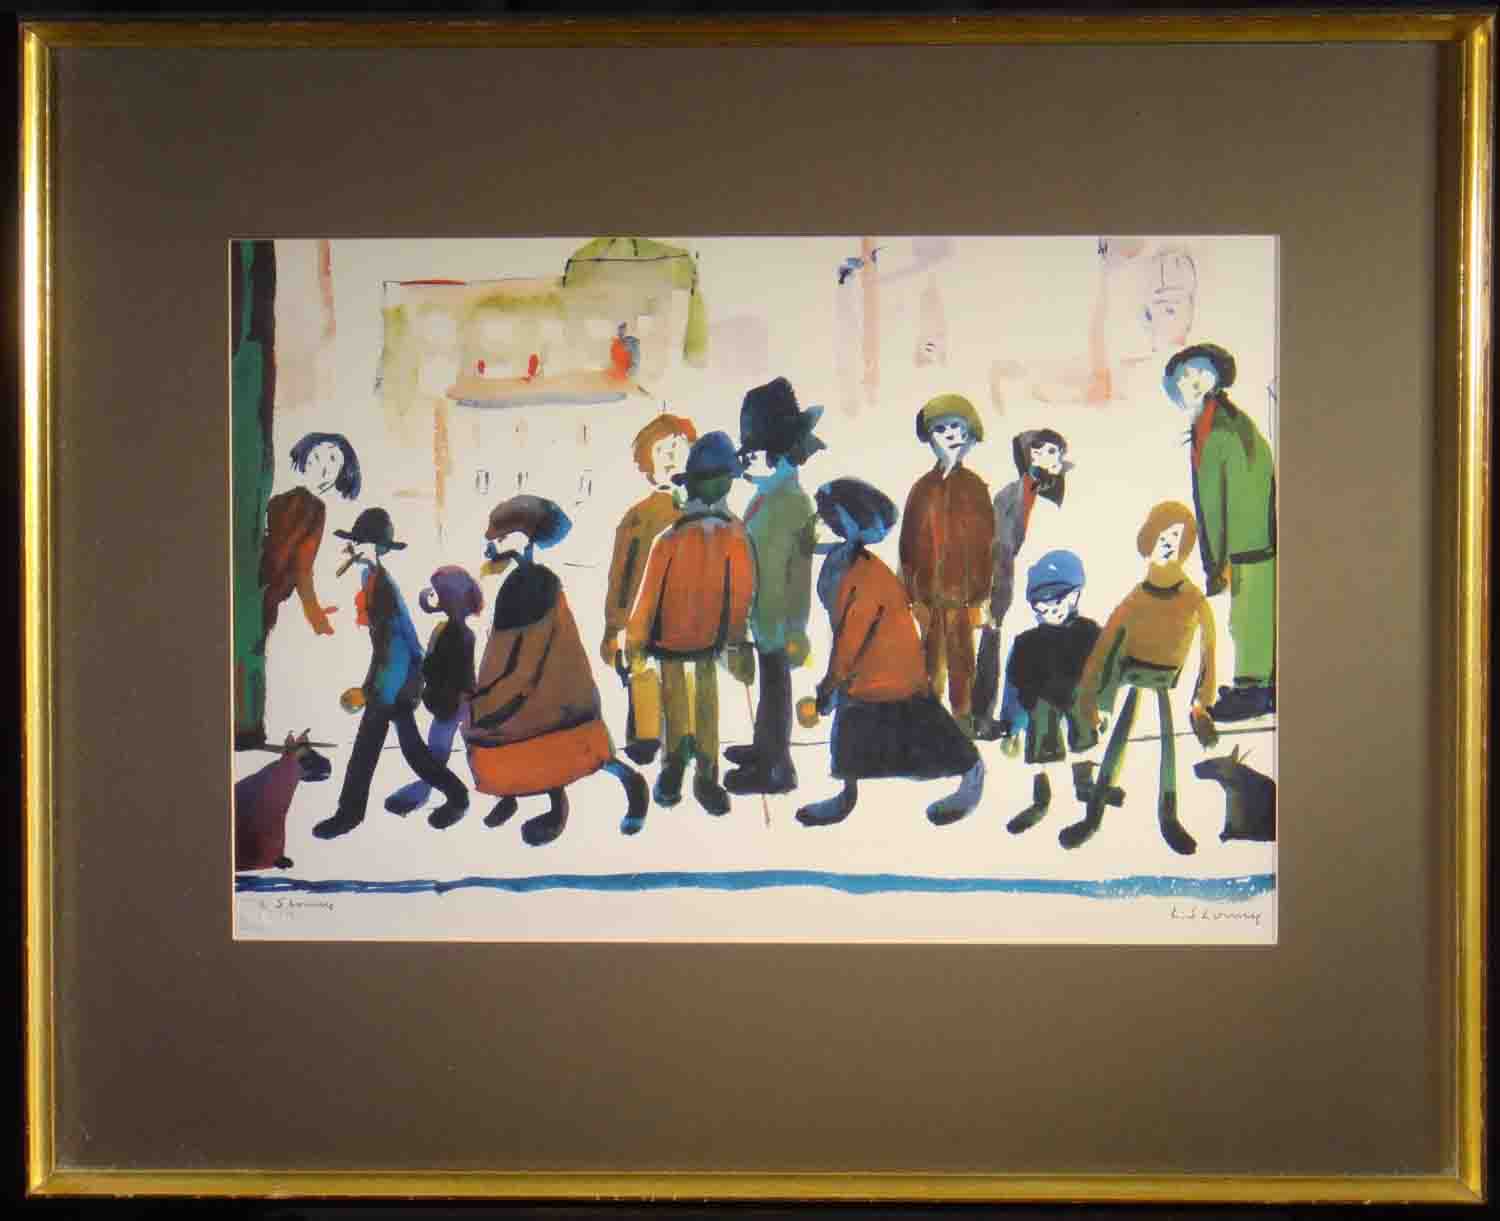 lowry, people standing about, framed, signed print lslowry